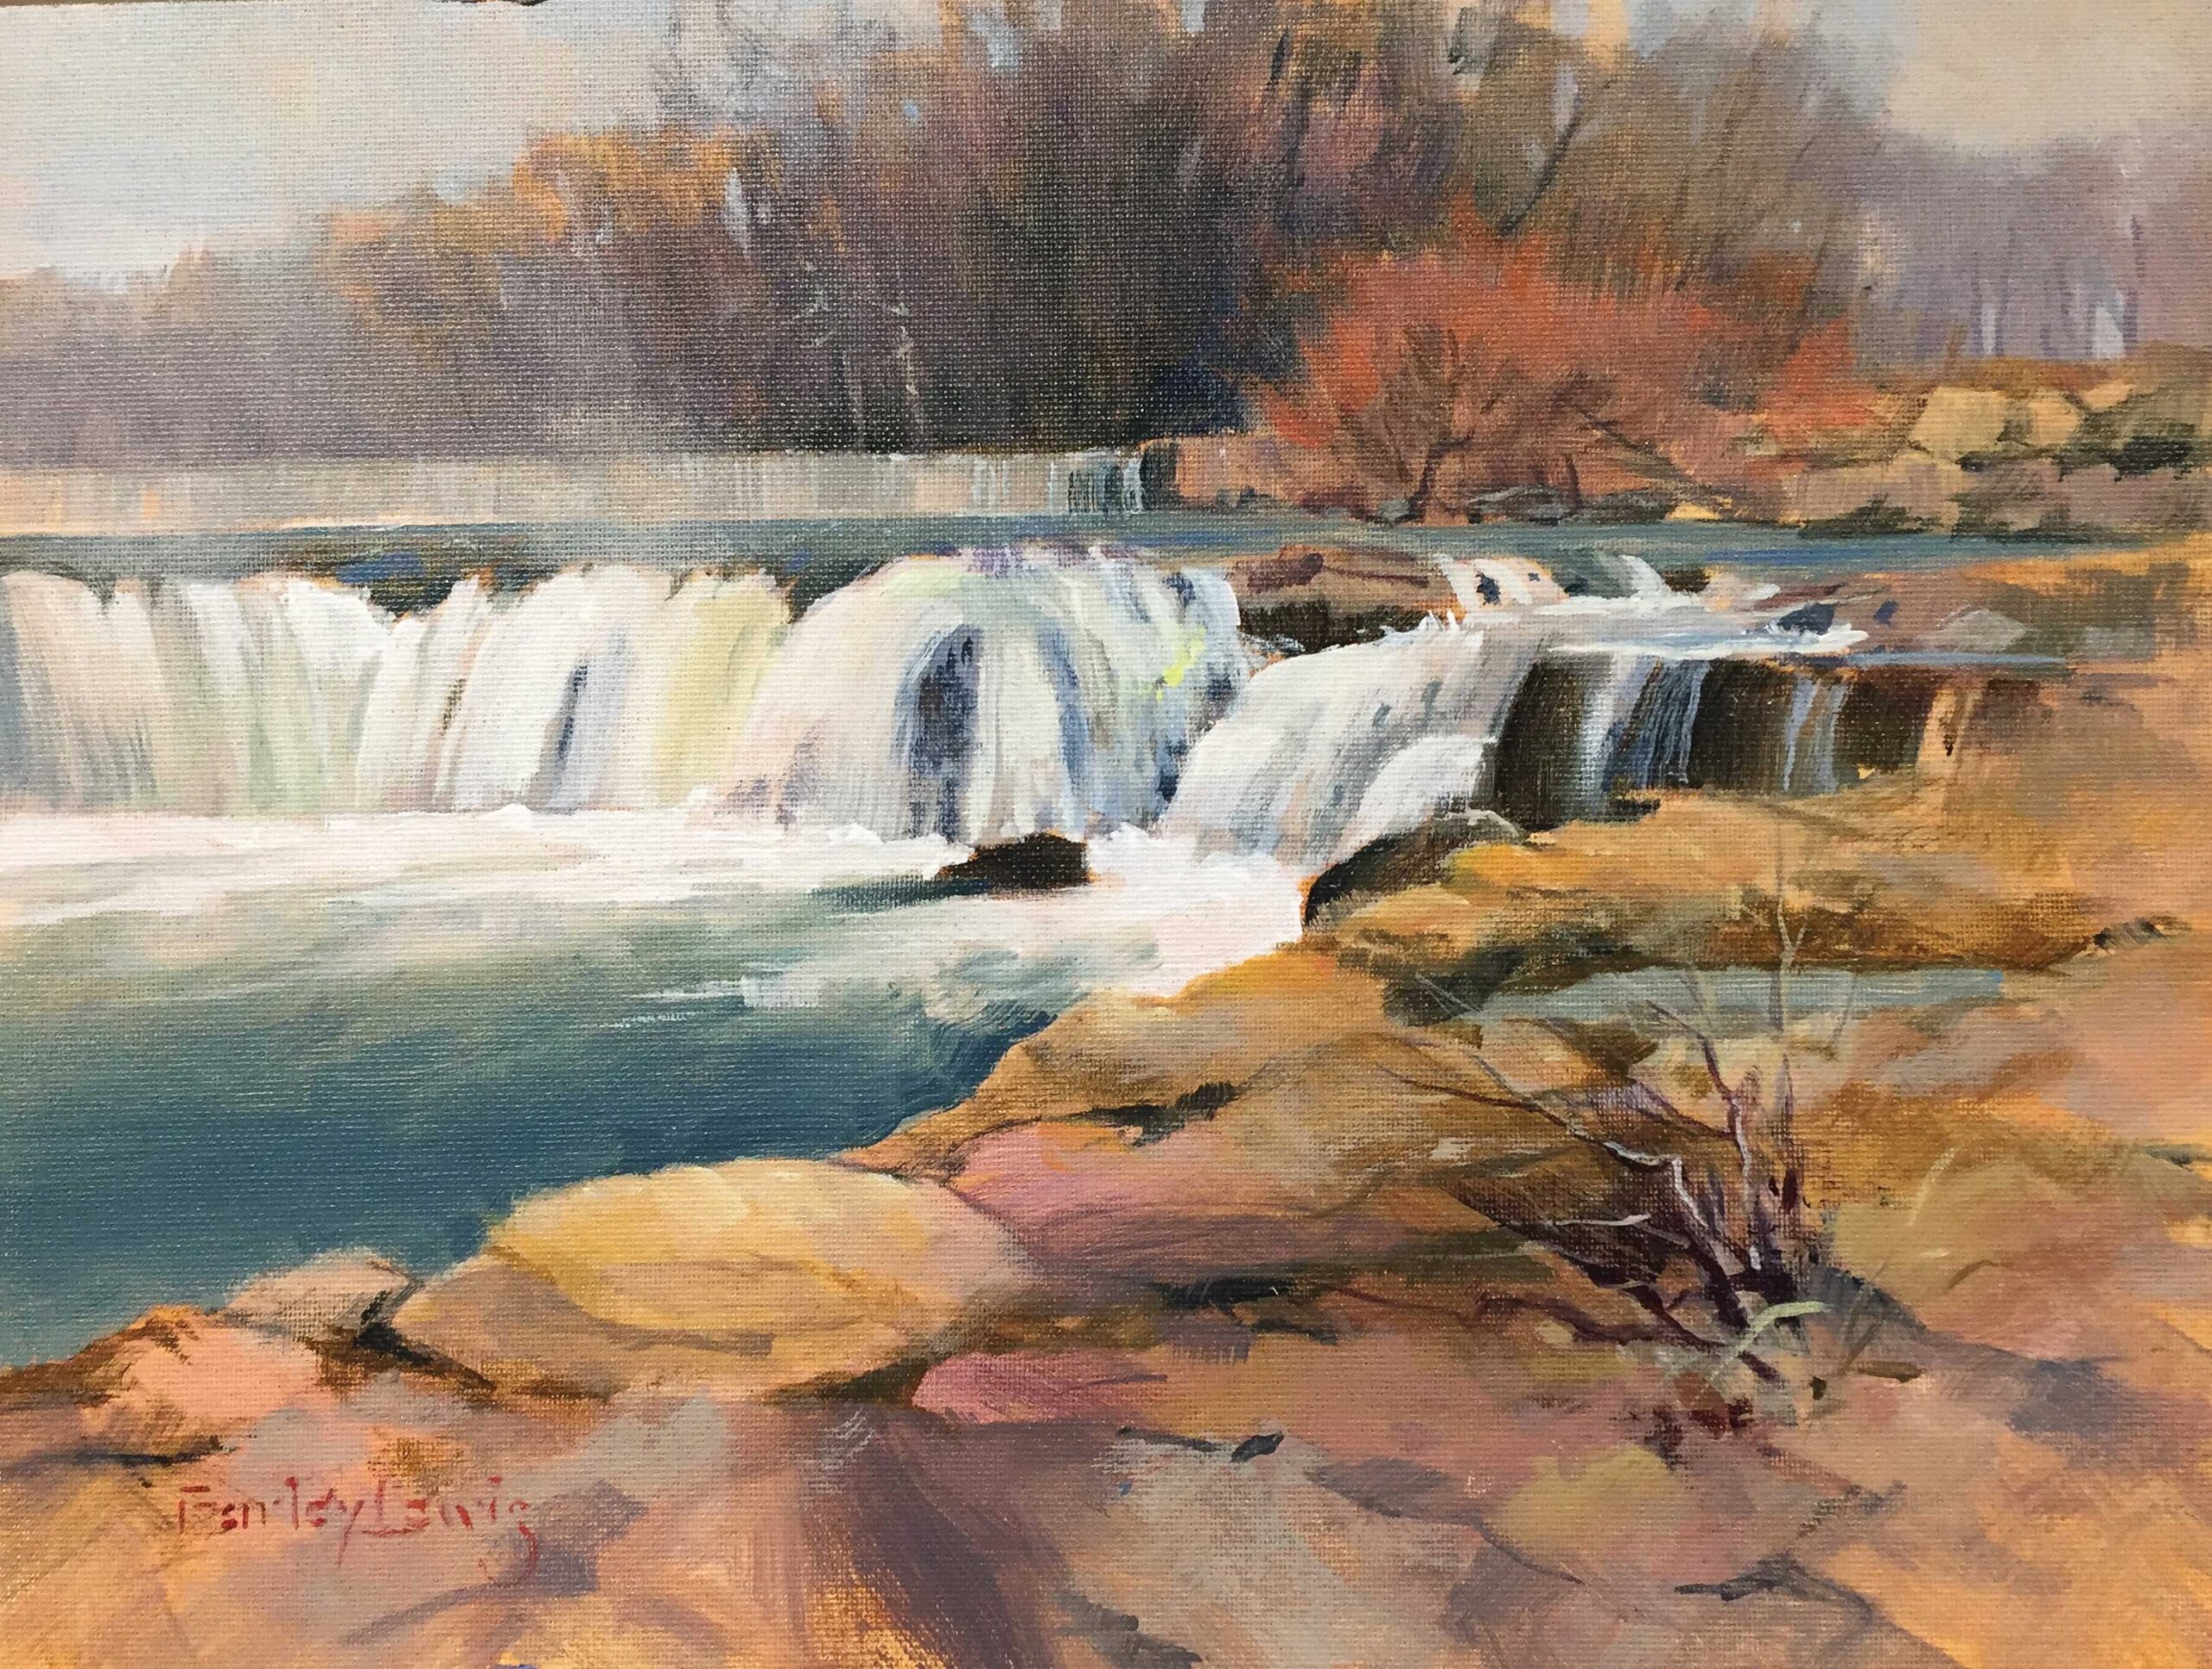 Farley Lewis, “Grand Falls,” 2020, acrylic, 9 x 12 in., Available from artist, Plein air